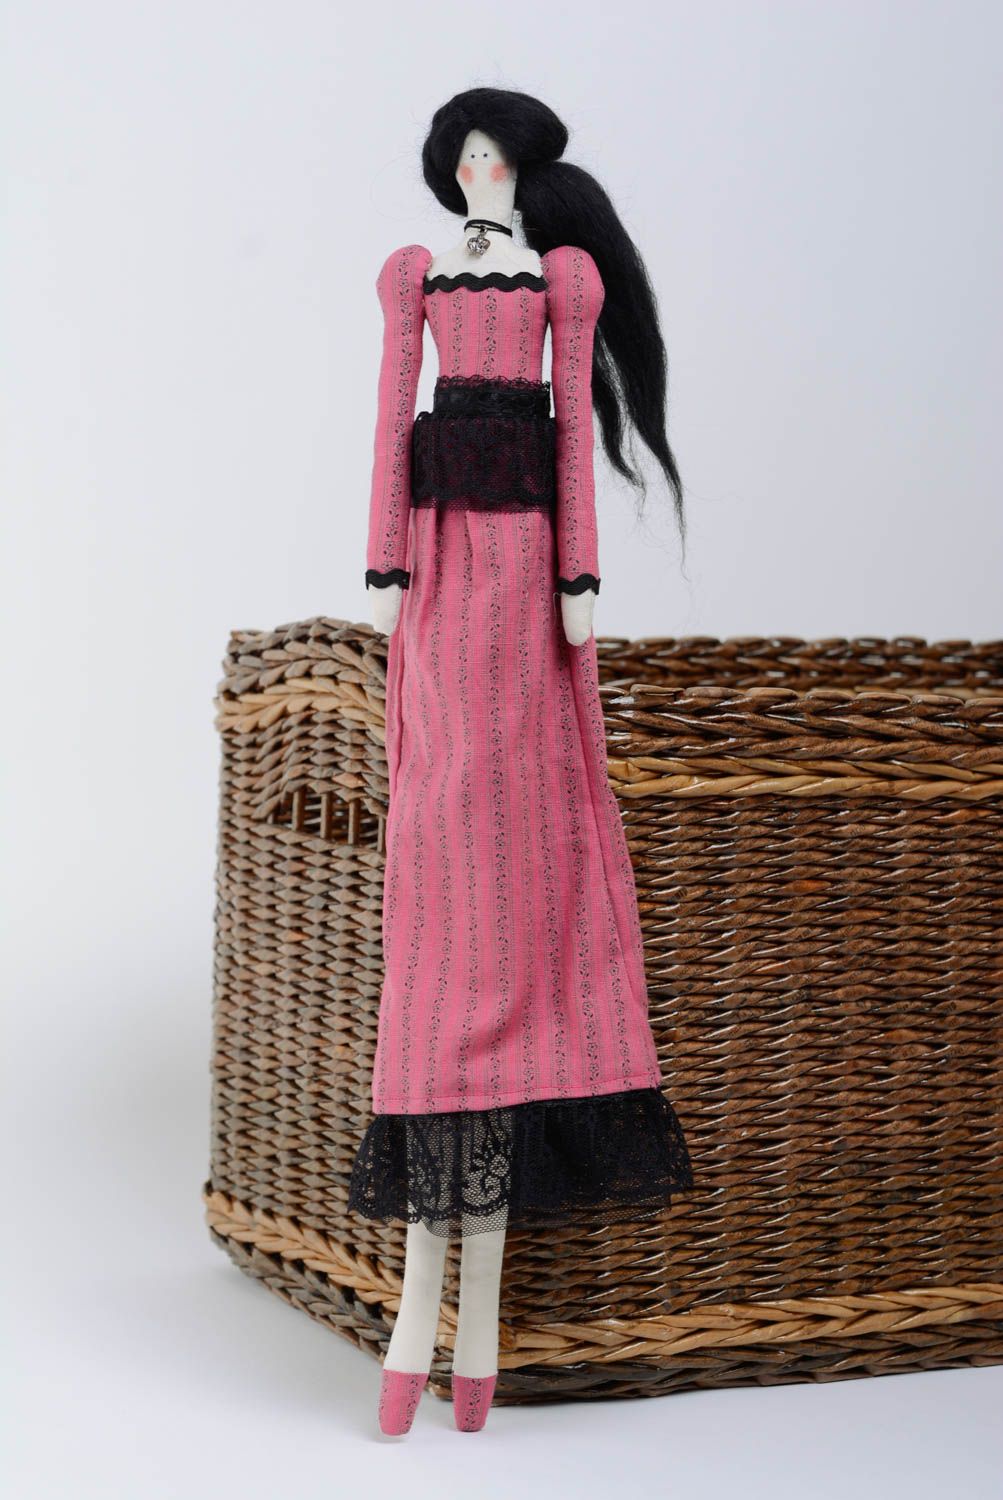 Designer doll made of cloth with black hair in pink dress handmade interior toy photo 1